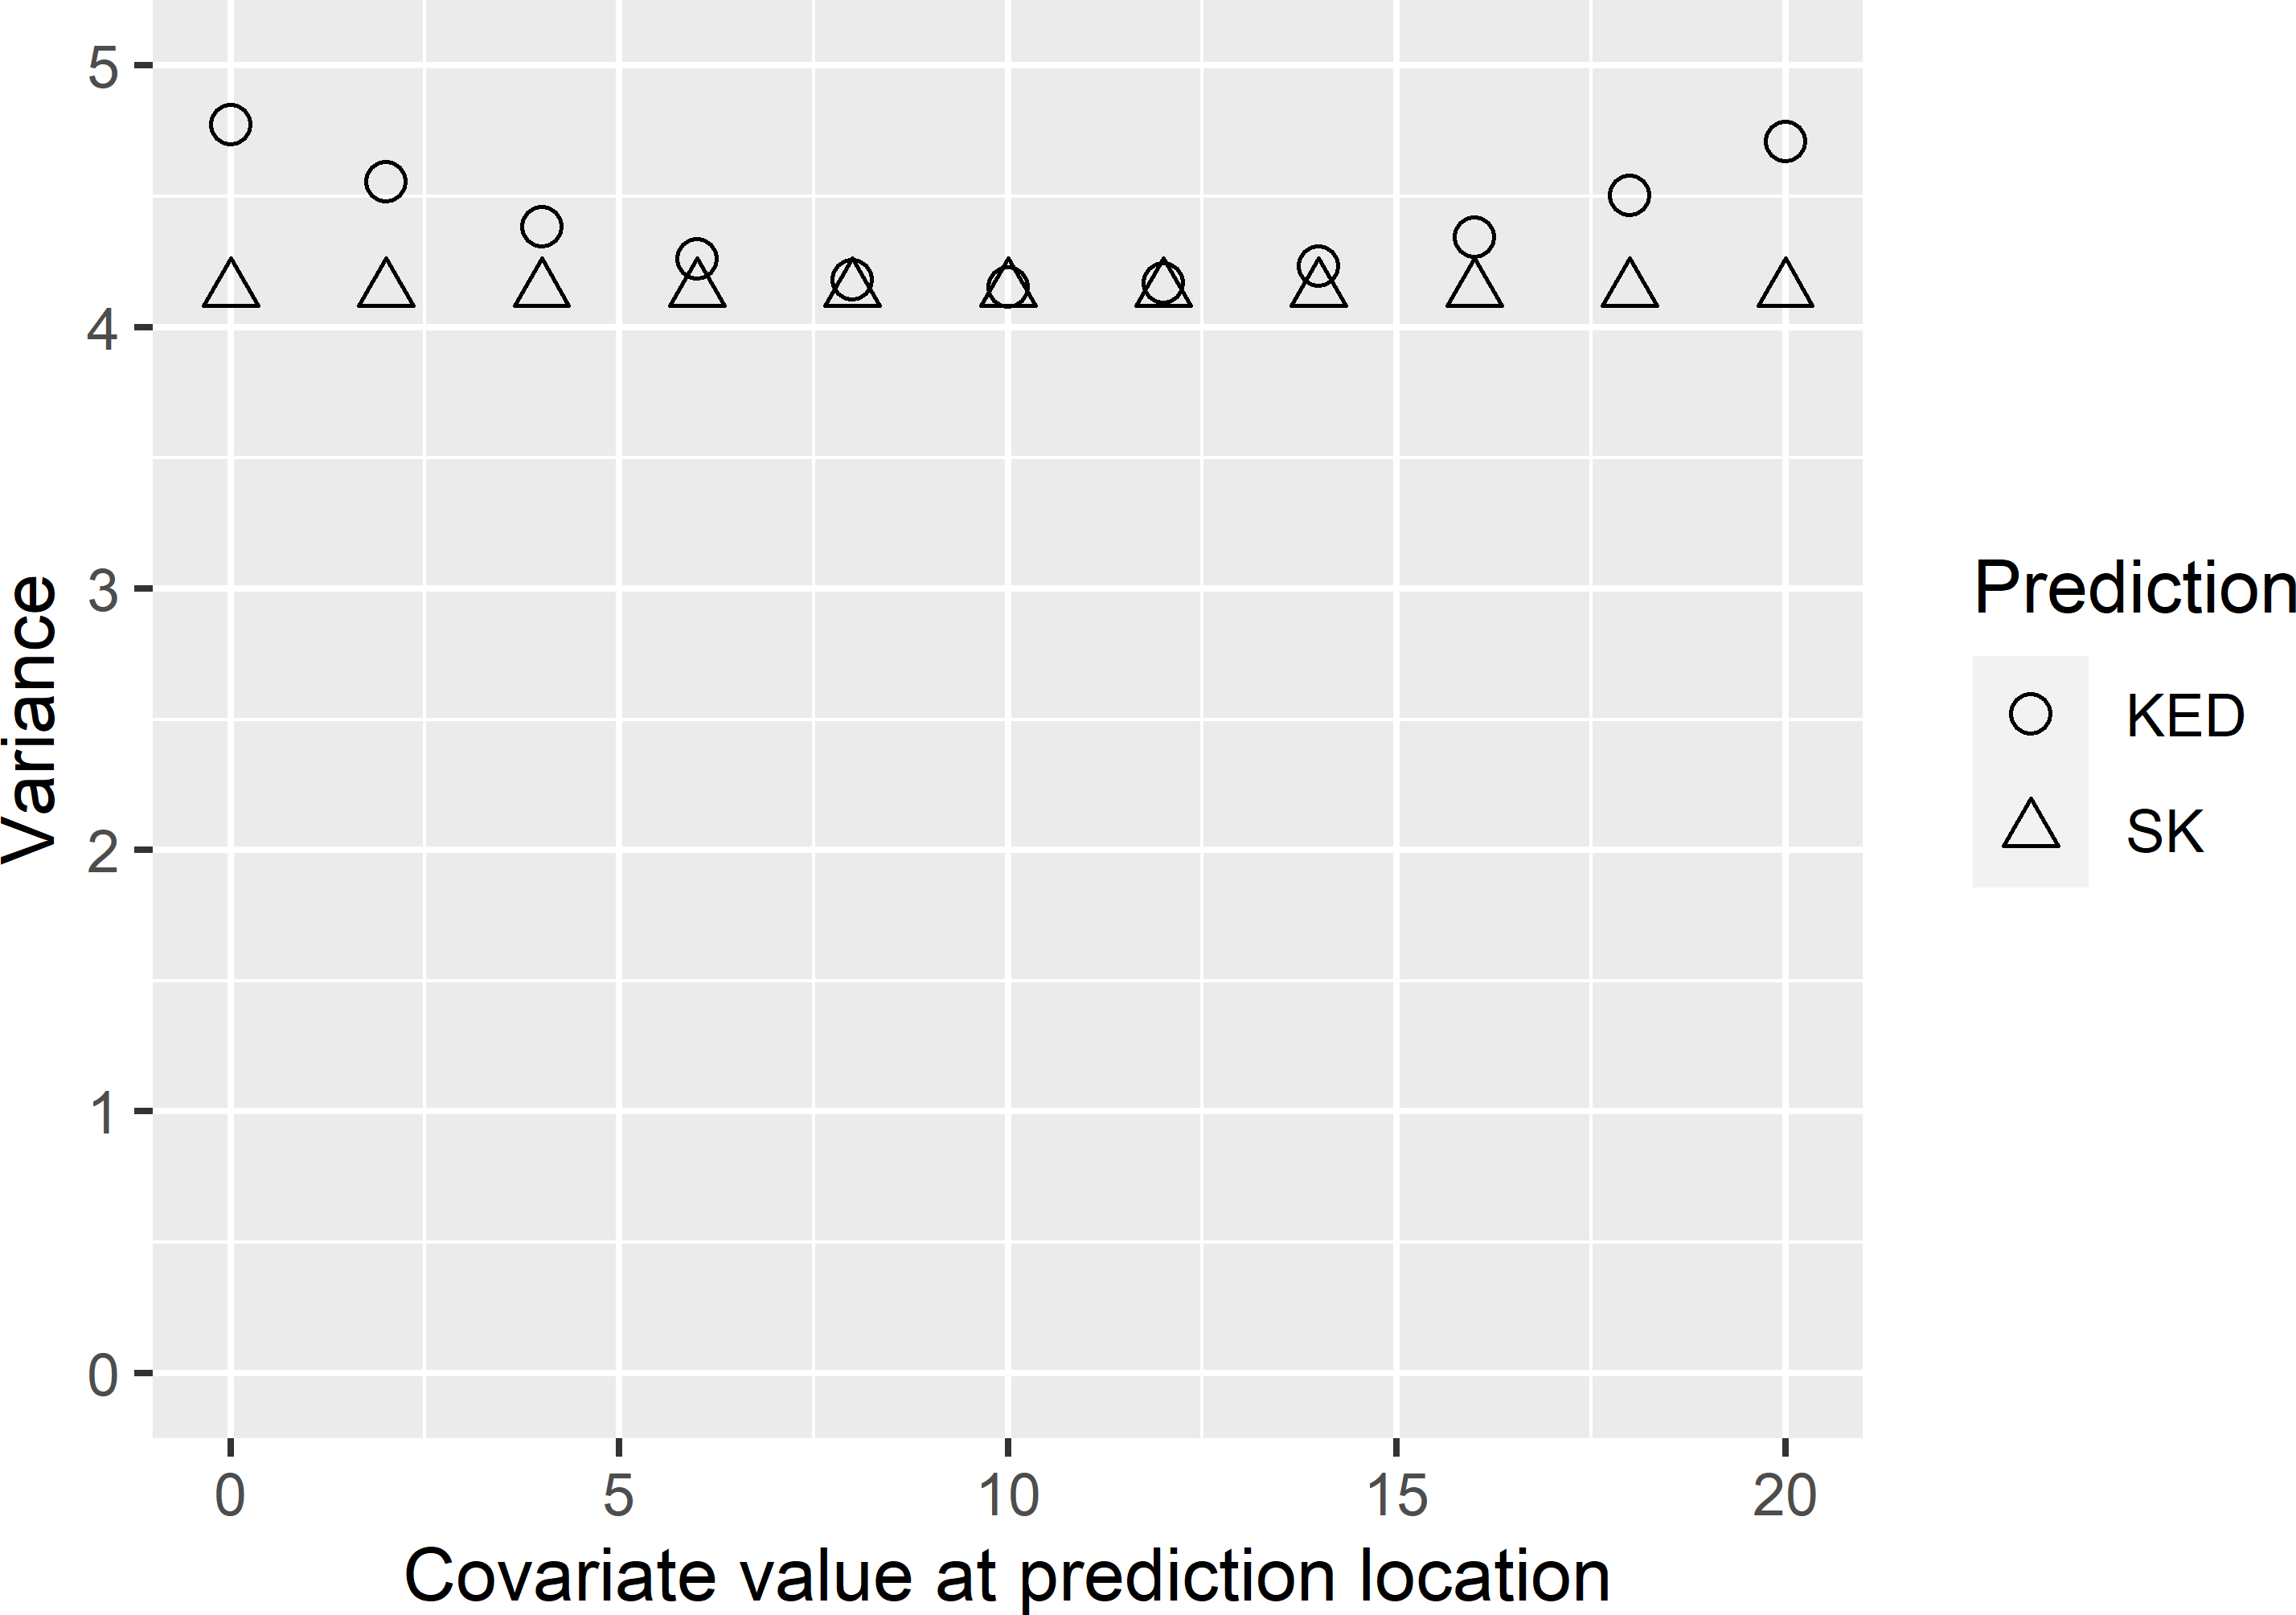 Variance of the prediction error as a function of the covariate value at a fixed prediction location, obtained with kriging with an external drift (KED) and simple kriging (SK).